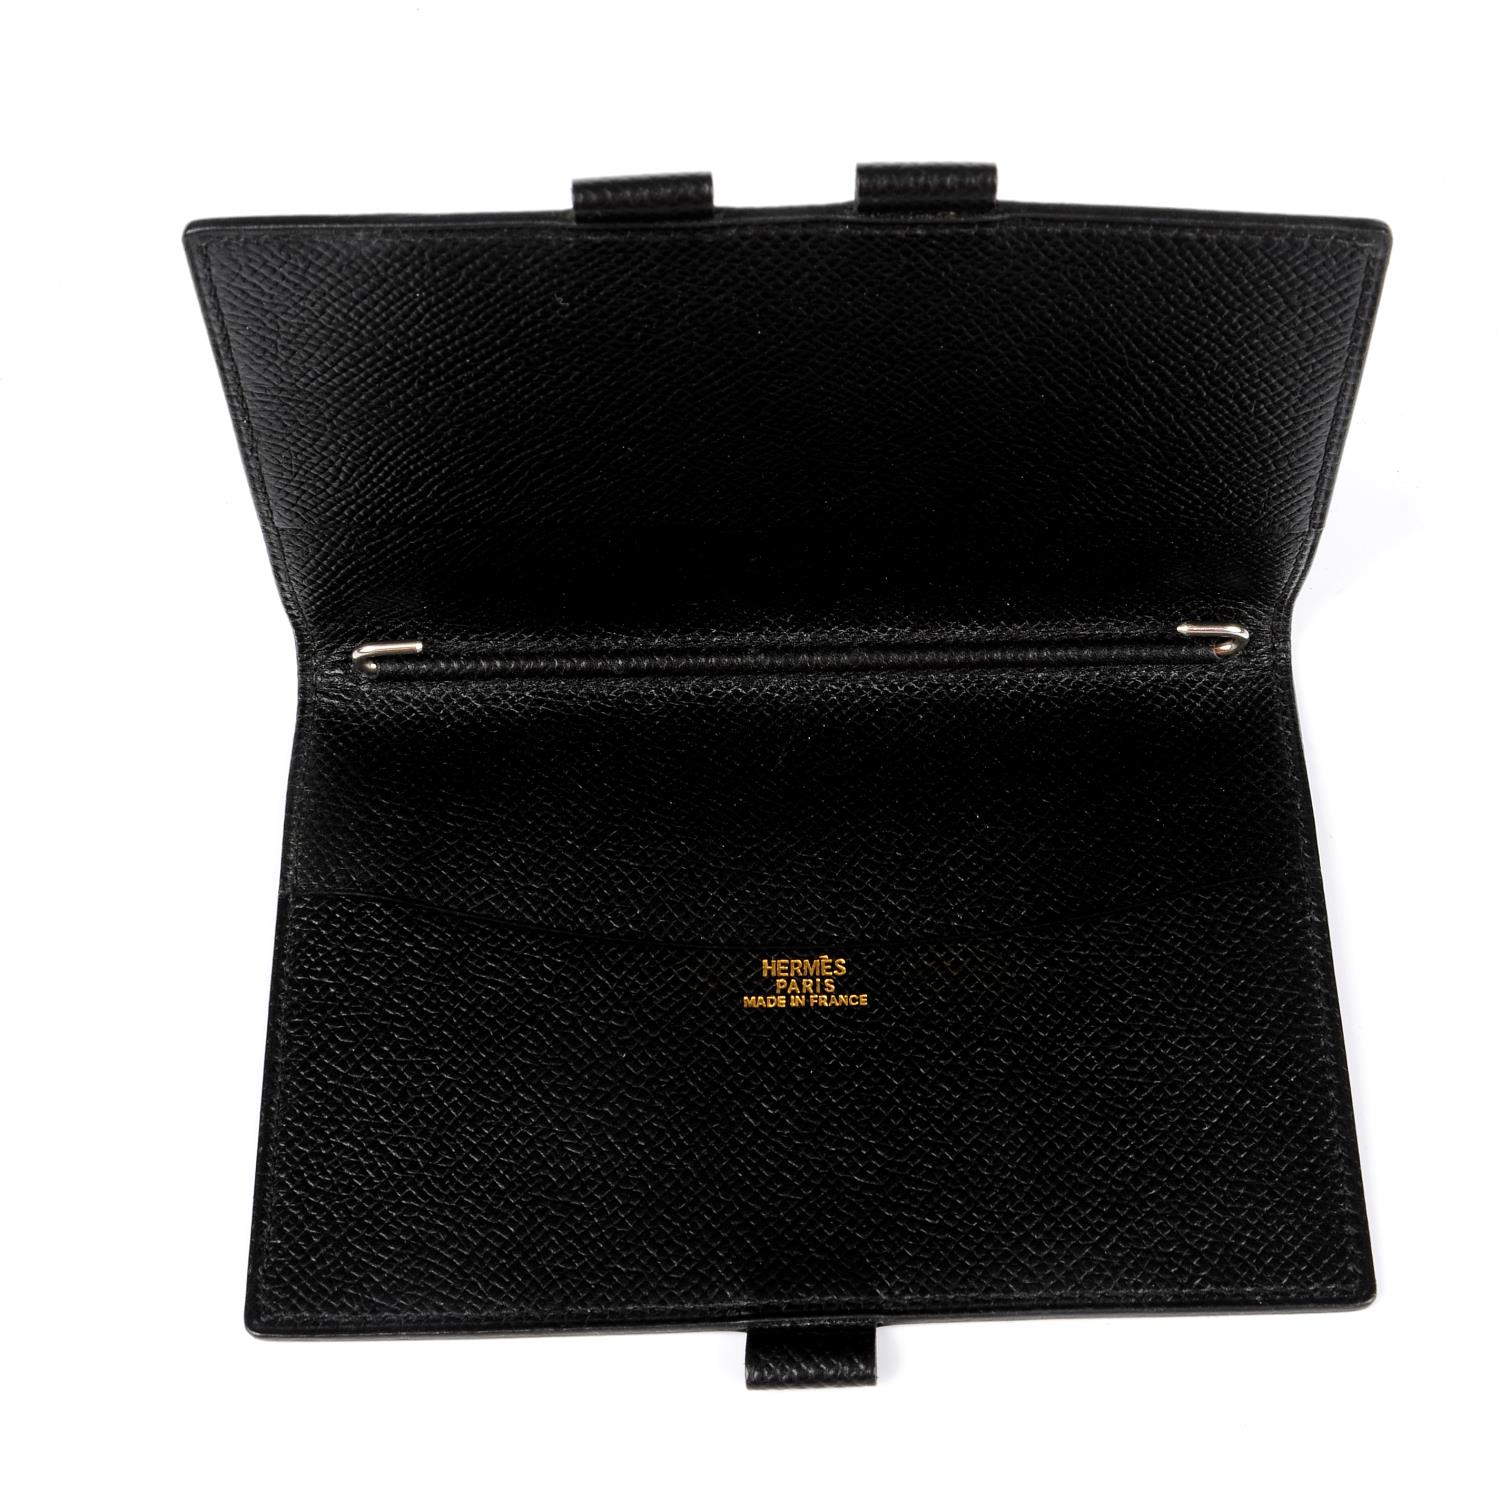 HERMÈS - a small black leather Vision agenda cover. - Image 3 of 3